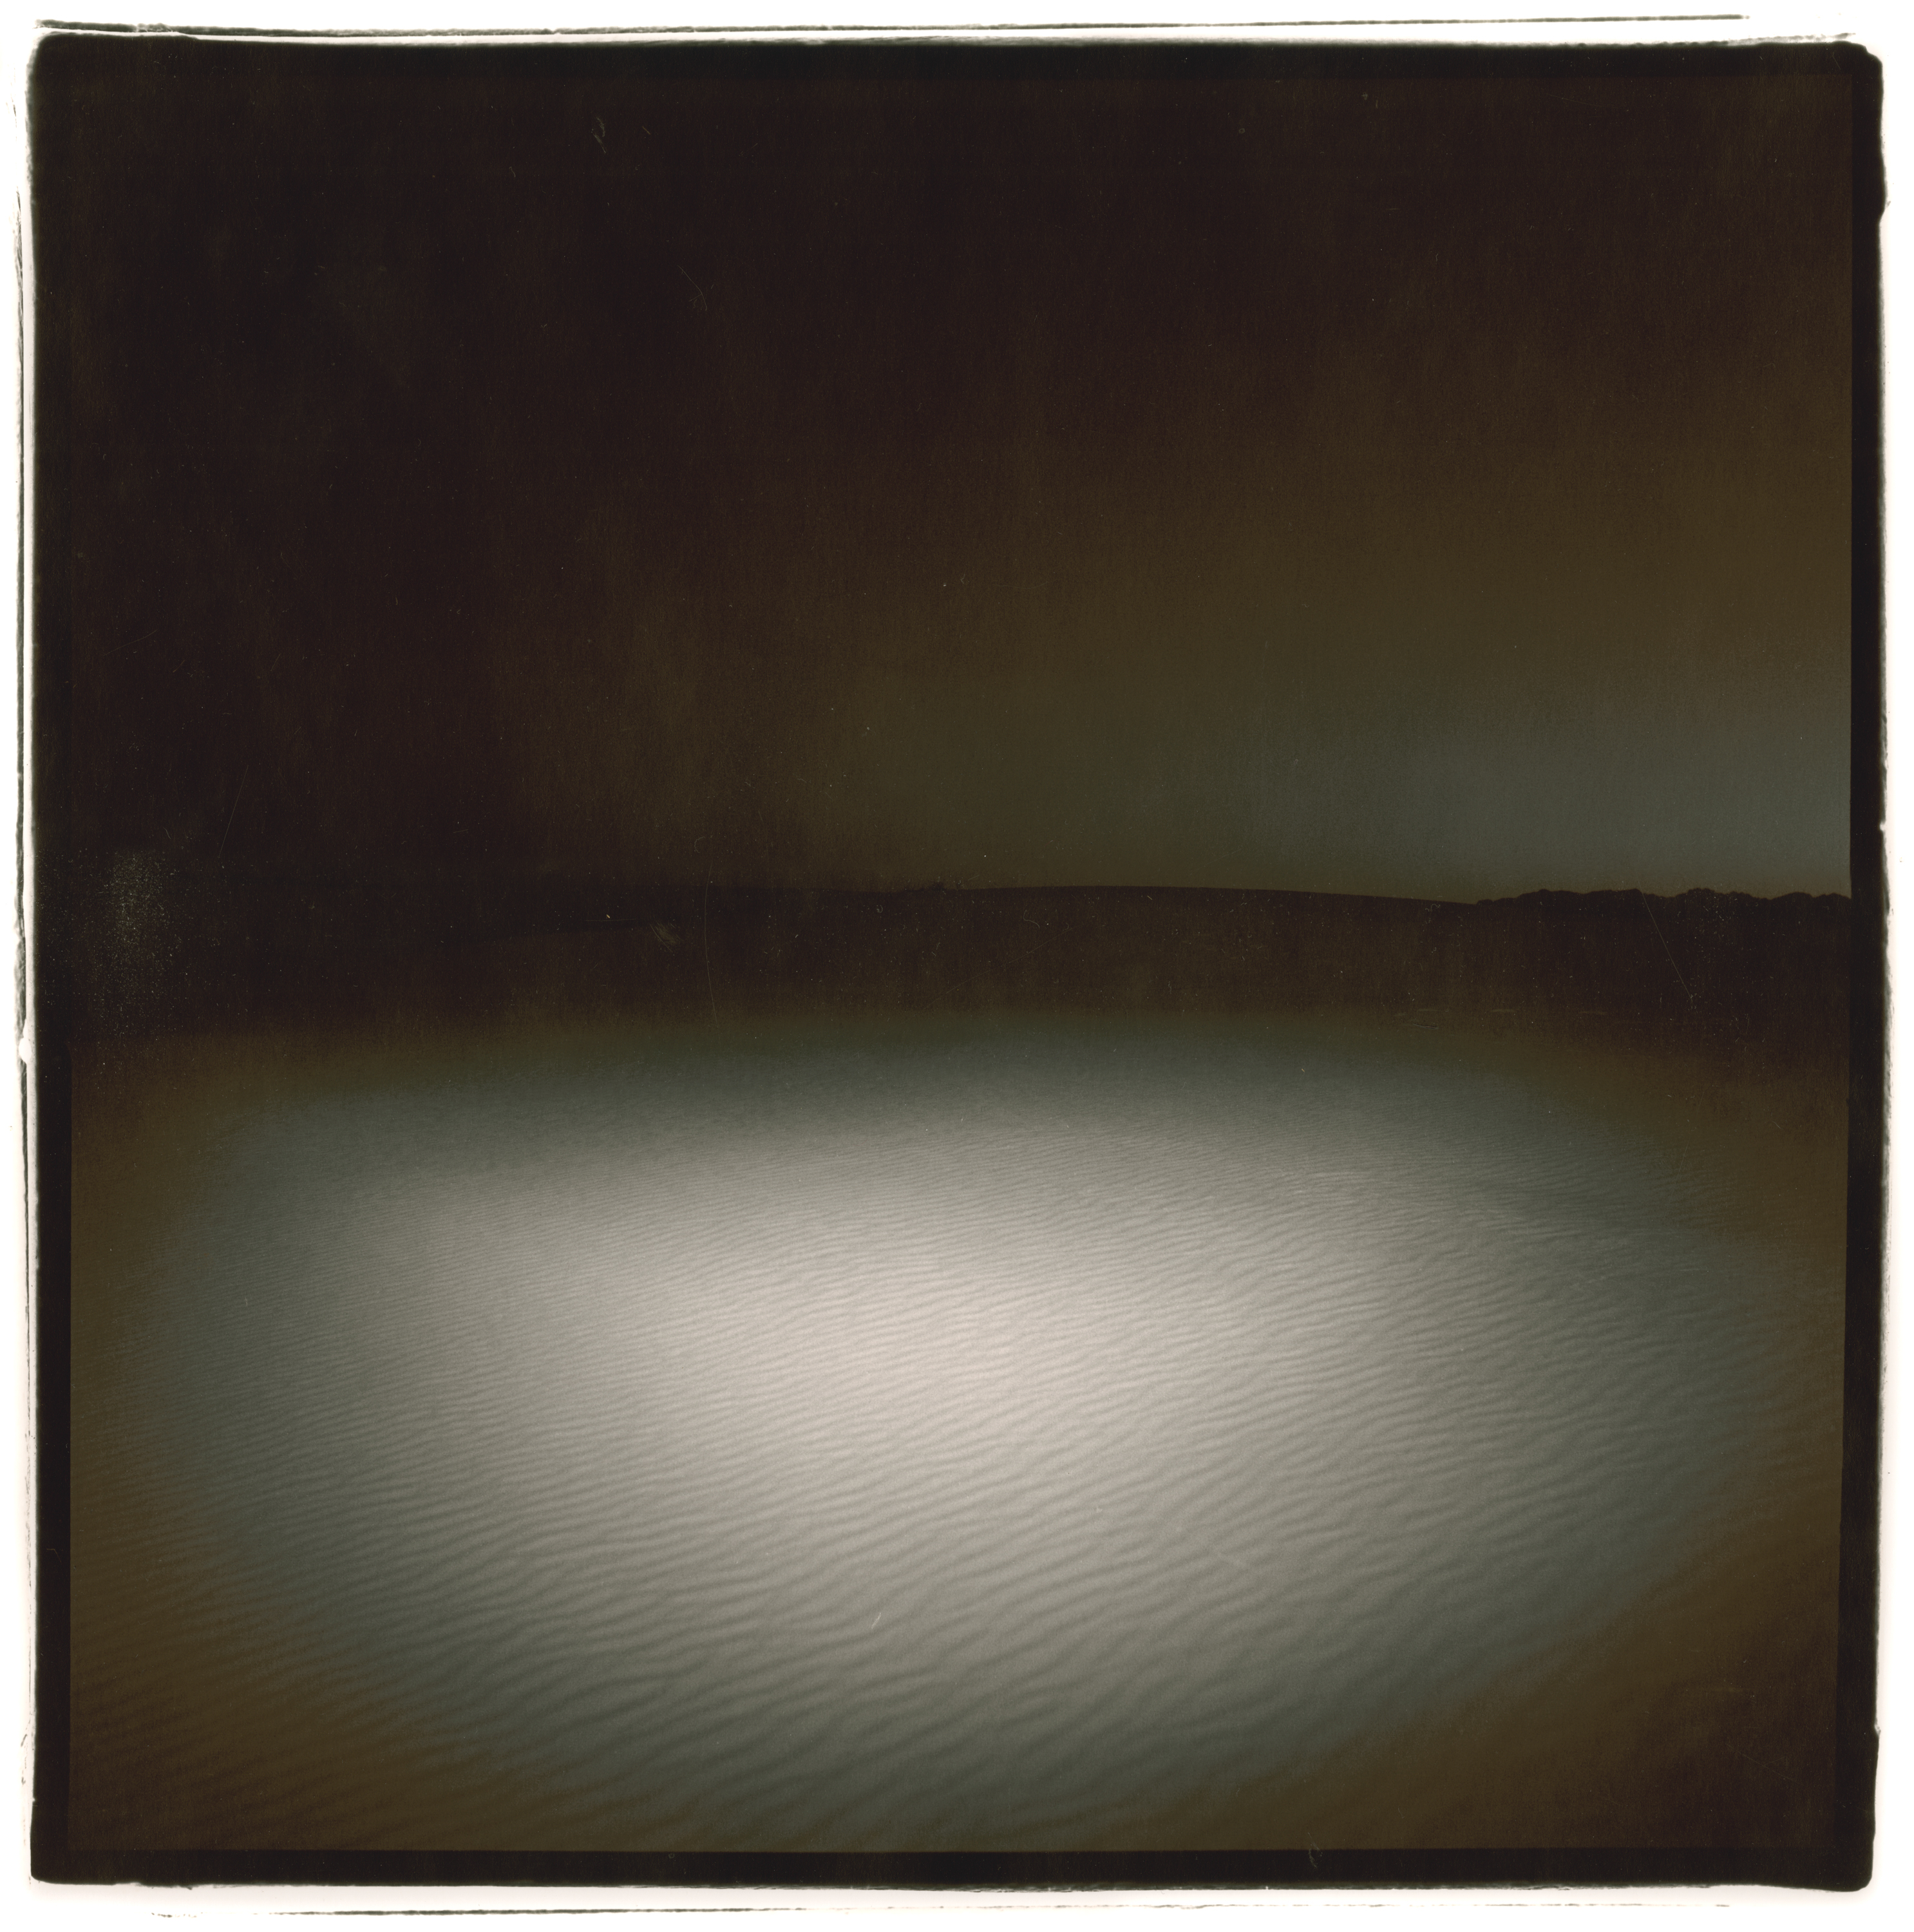 Black and white photograph of an empty desert at night with black borders around image